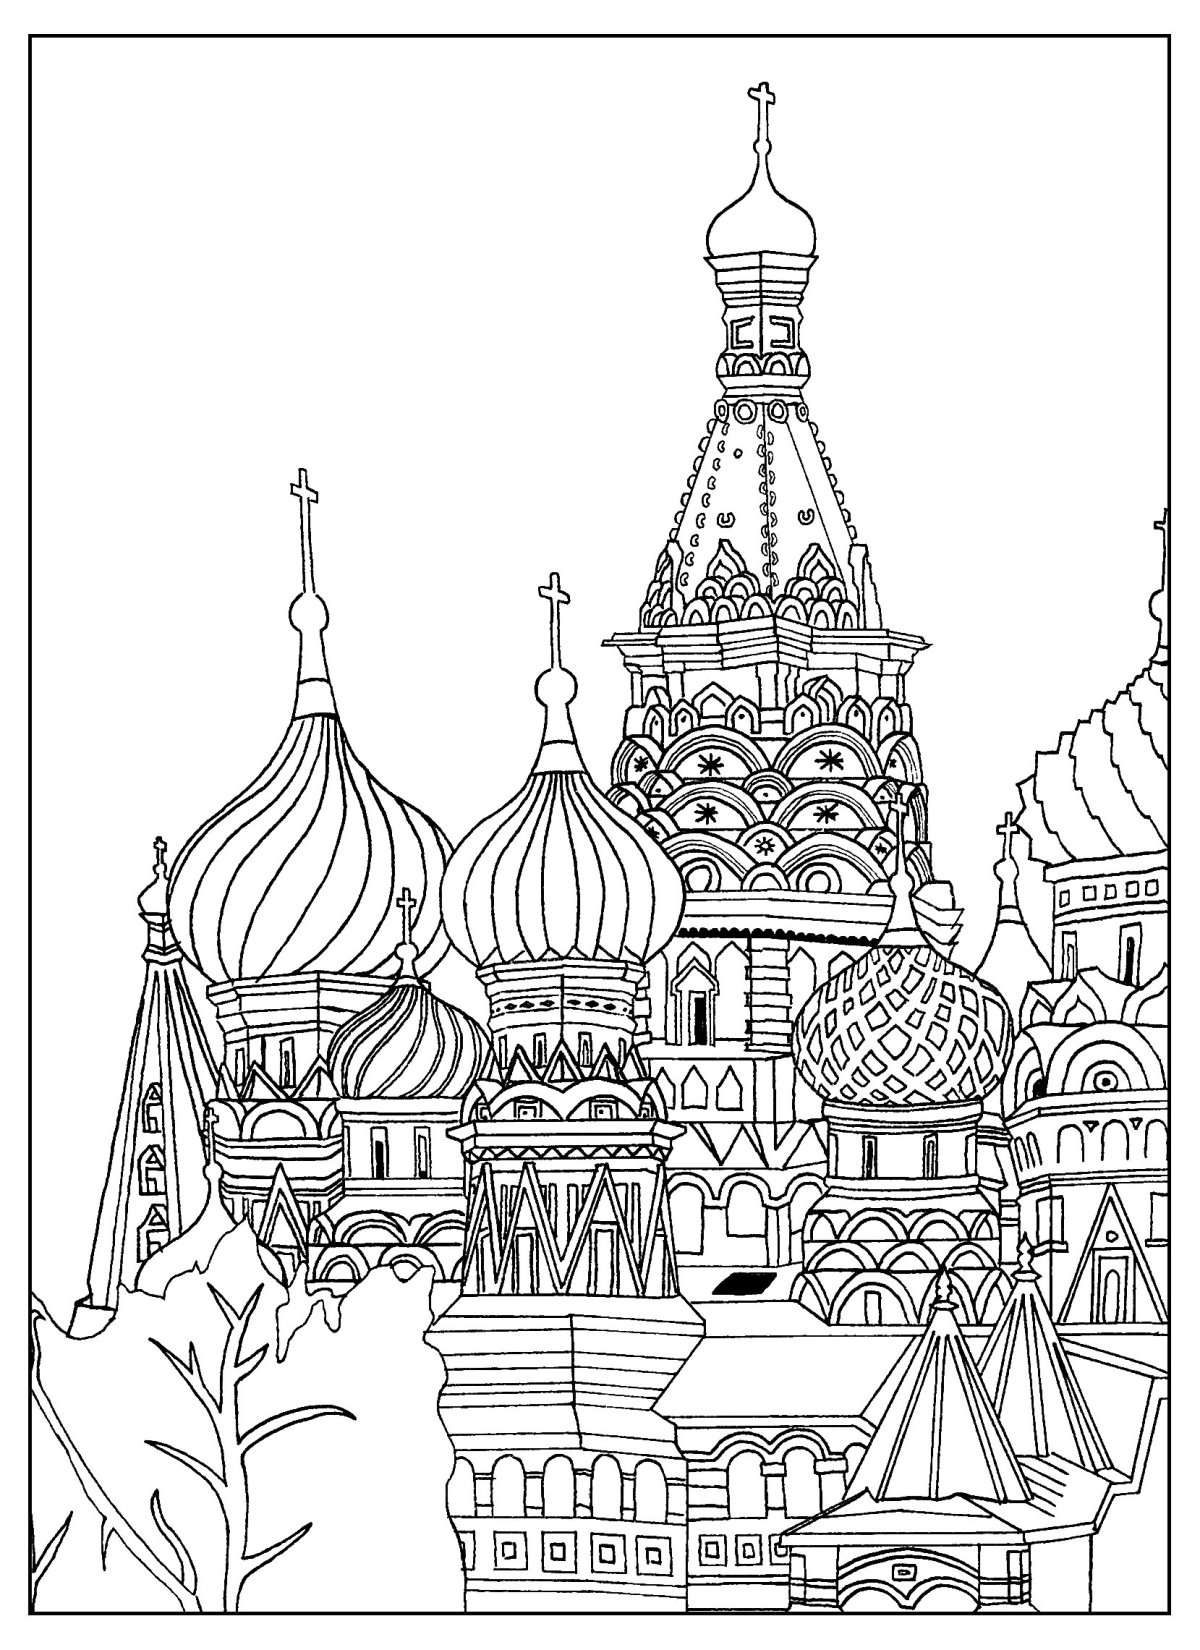 St. Basil's Cathedral for children #10